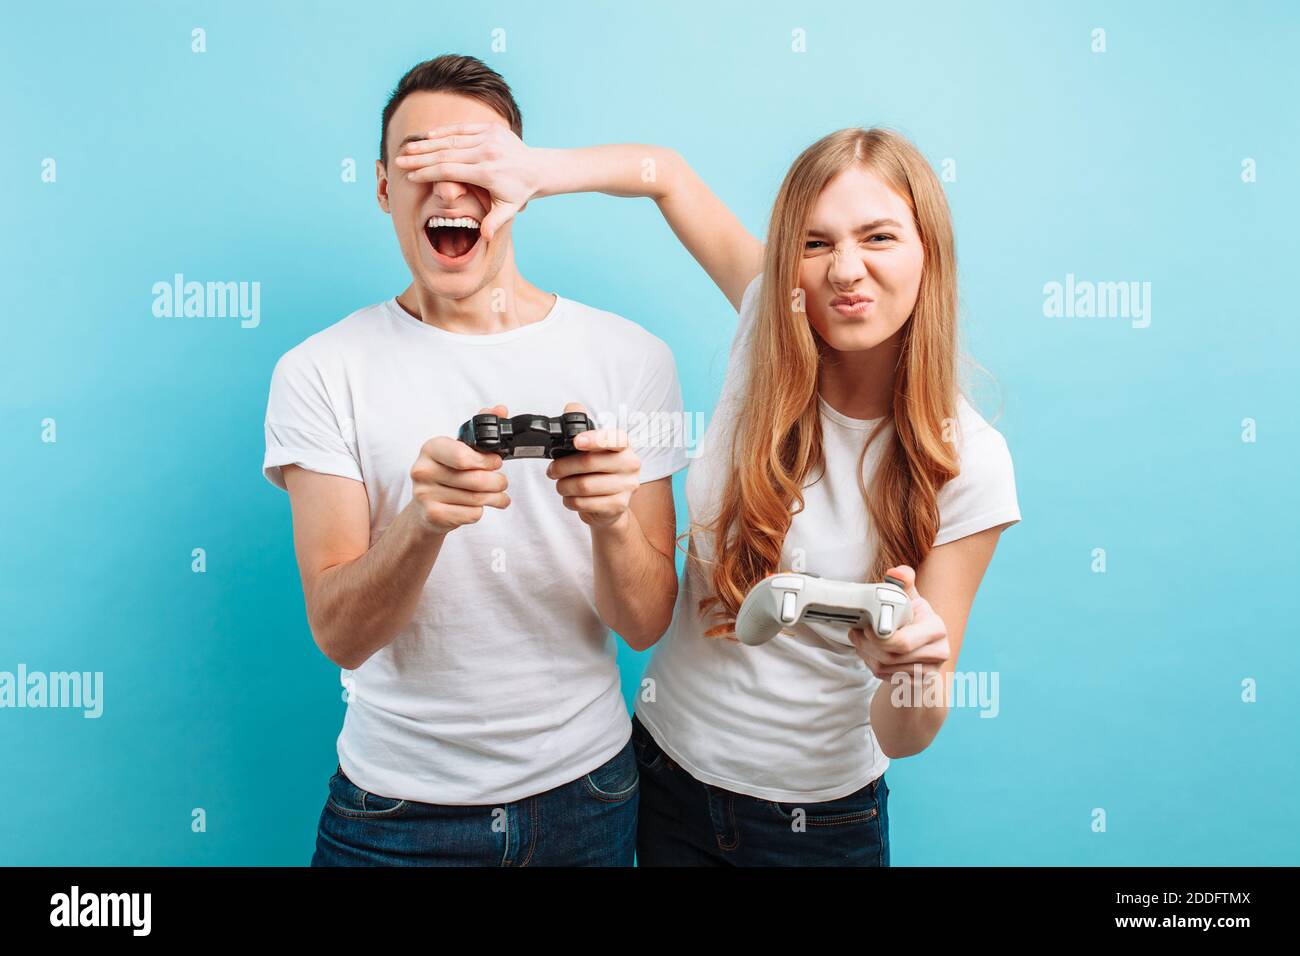 Excited young couple, a guy and a girl in white T-shirts with joysticks in their hands playing video games on a blue background Stock Photo